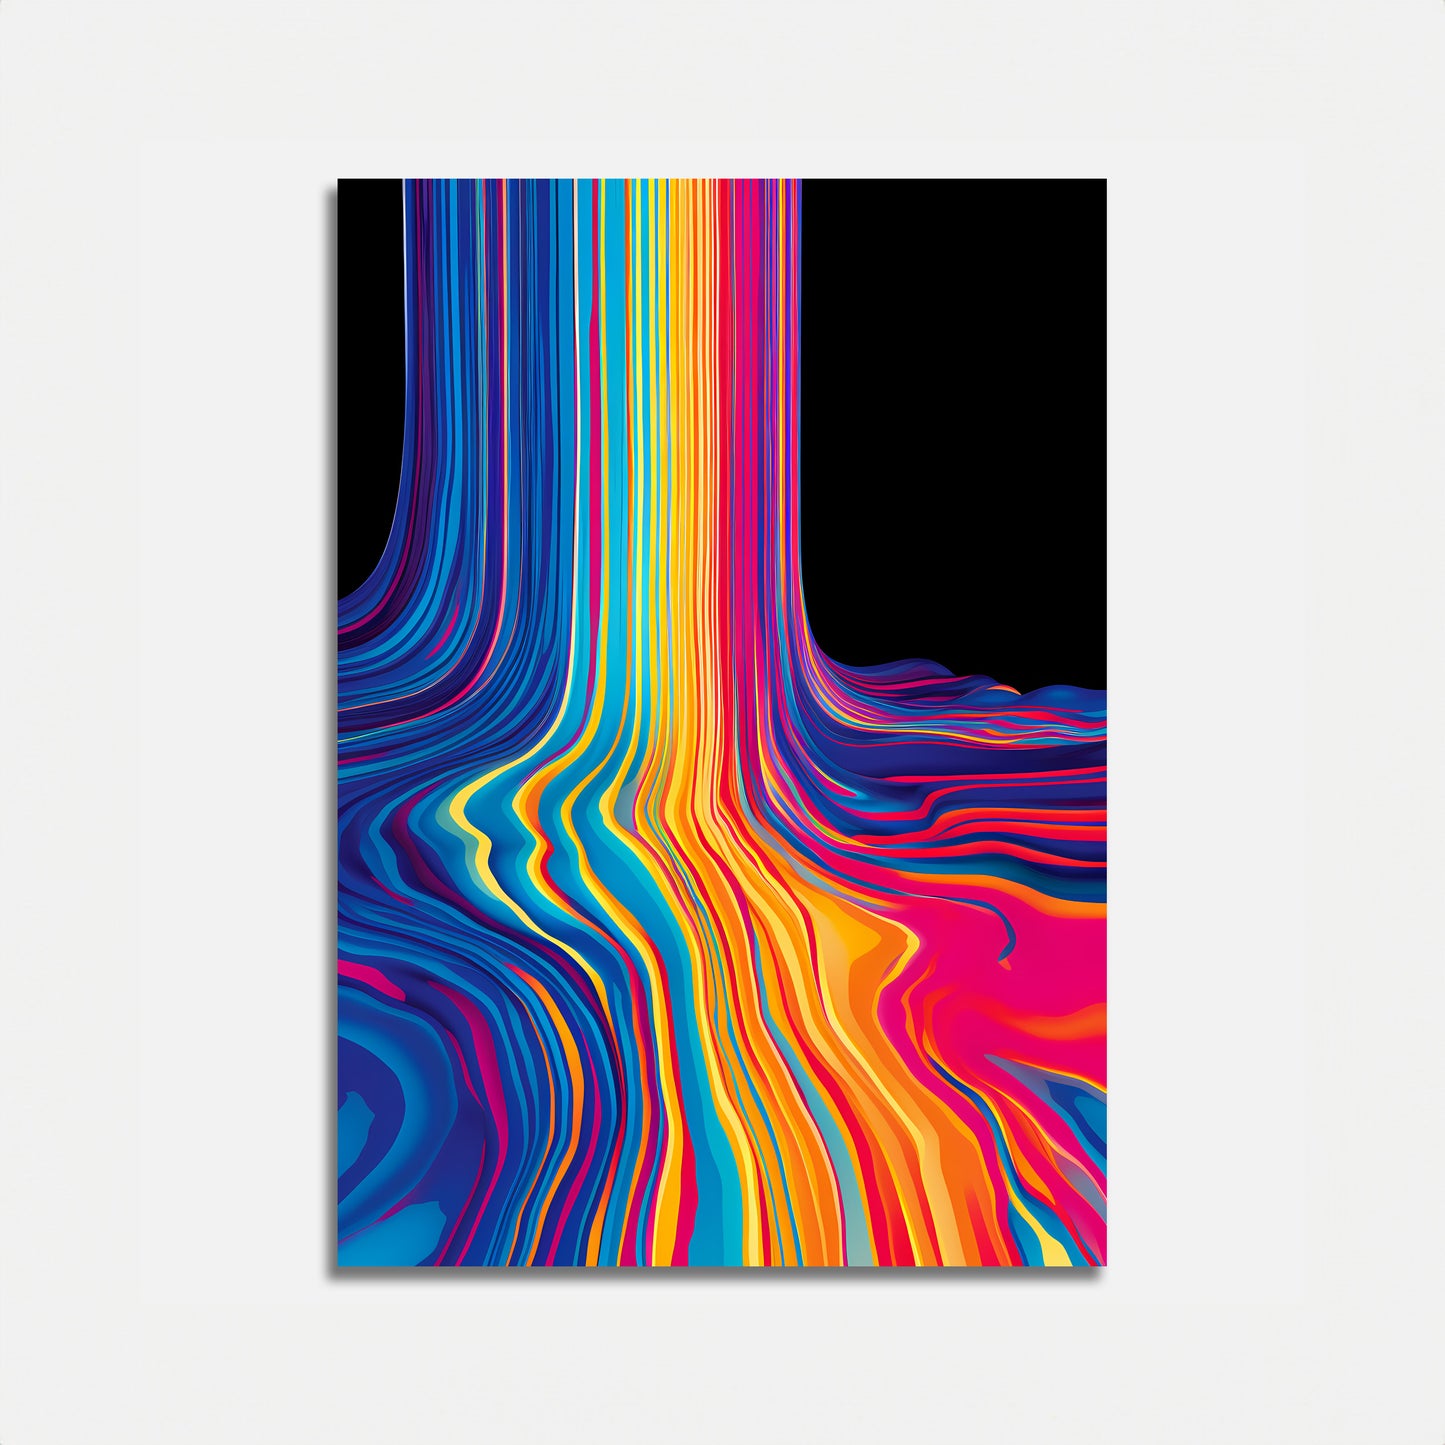 A vibrant abstract painting with flowing multicolored lines against a white background.